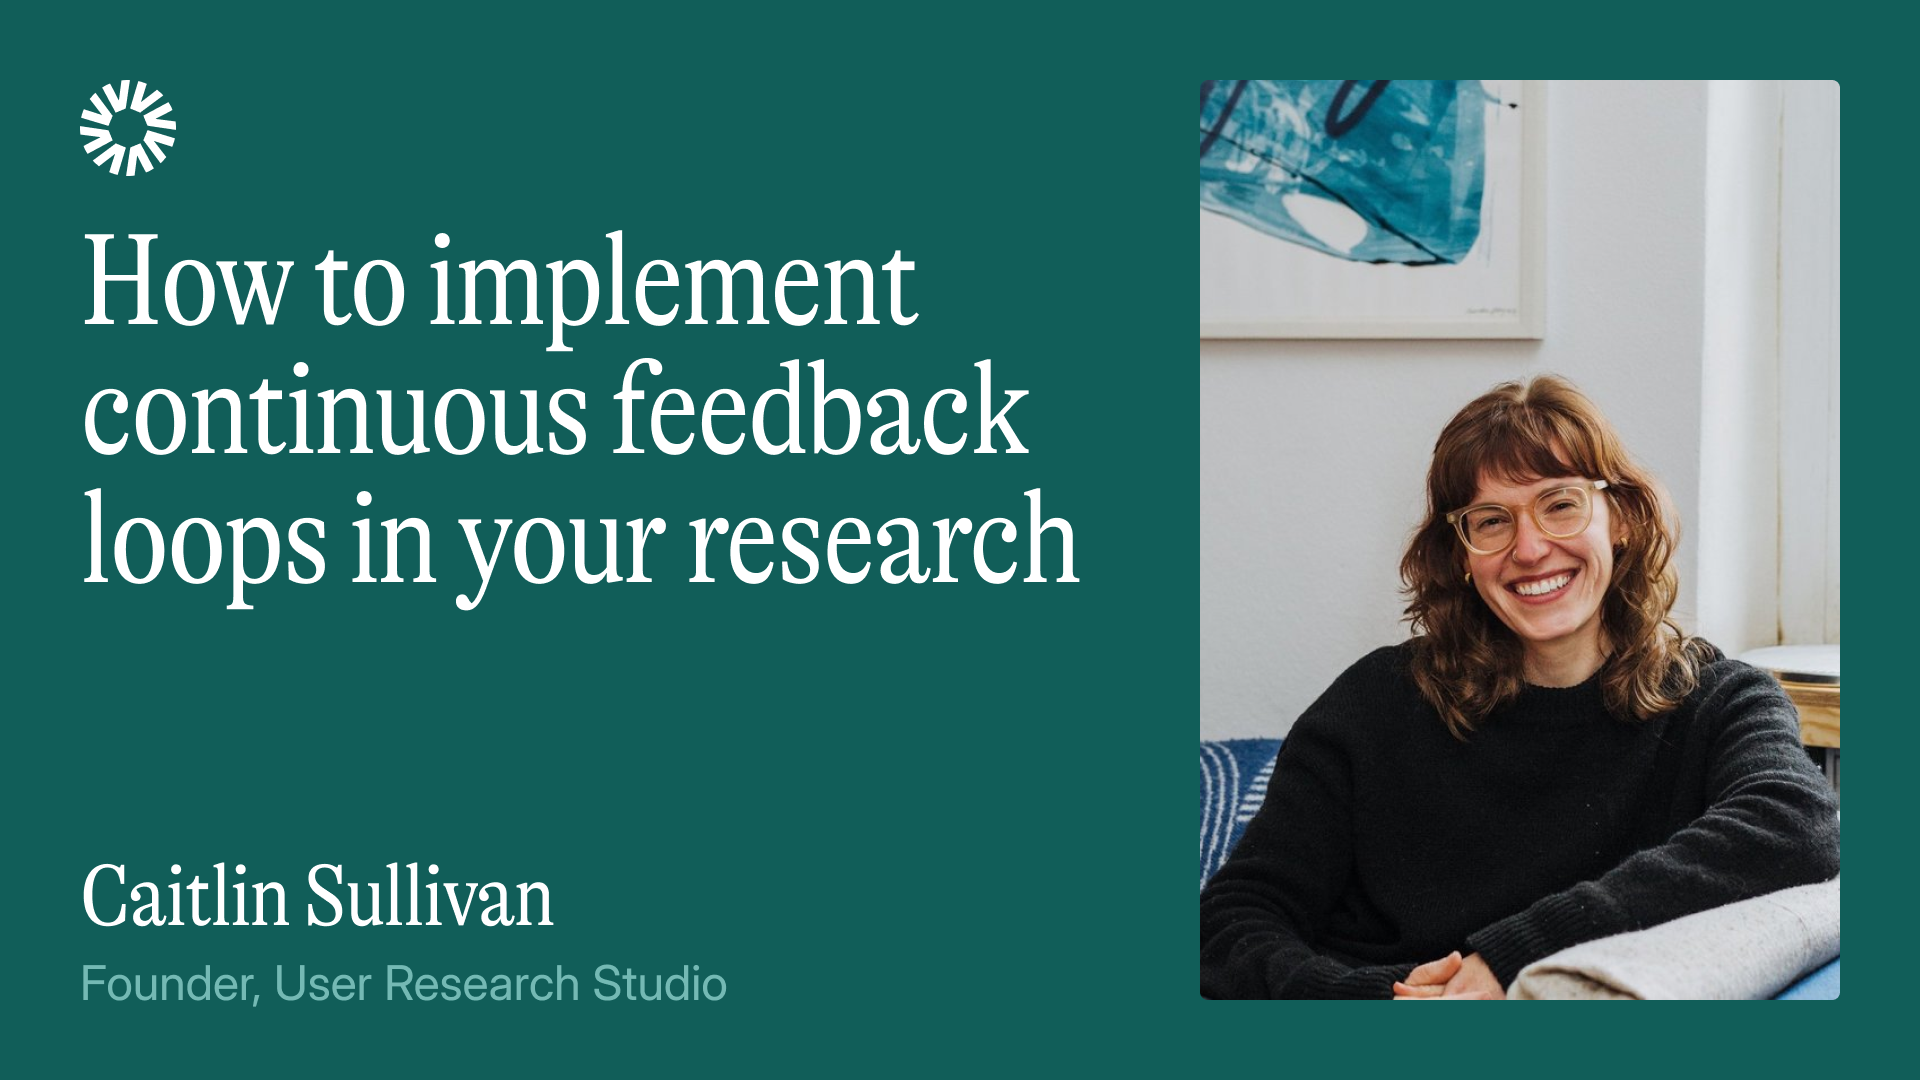 How to implement continuous feedback loops in your research